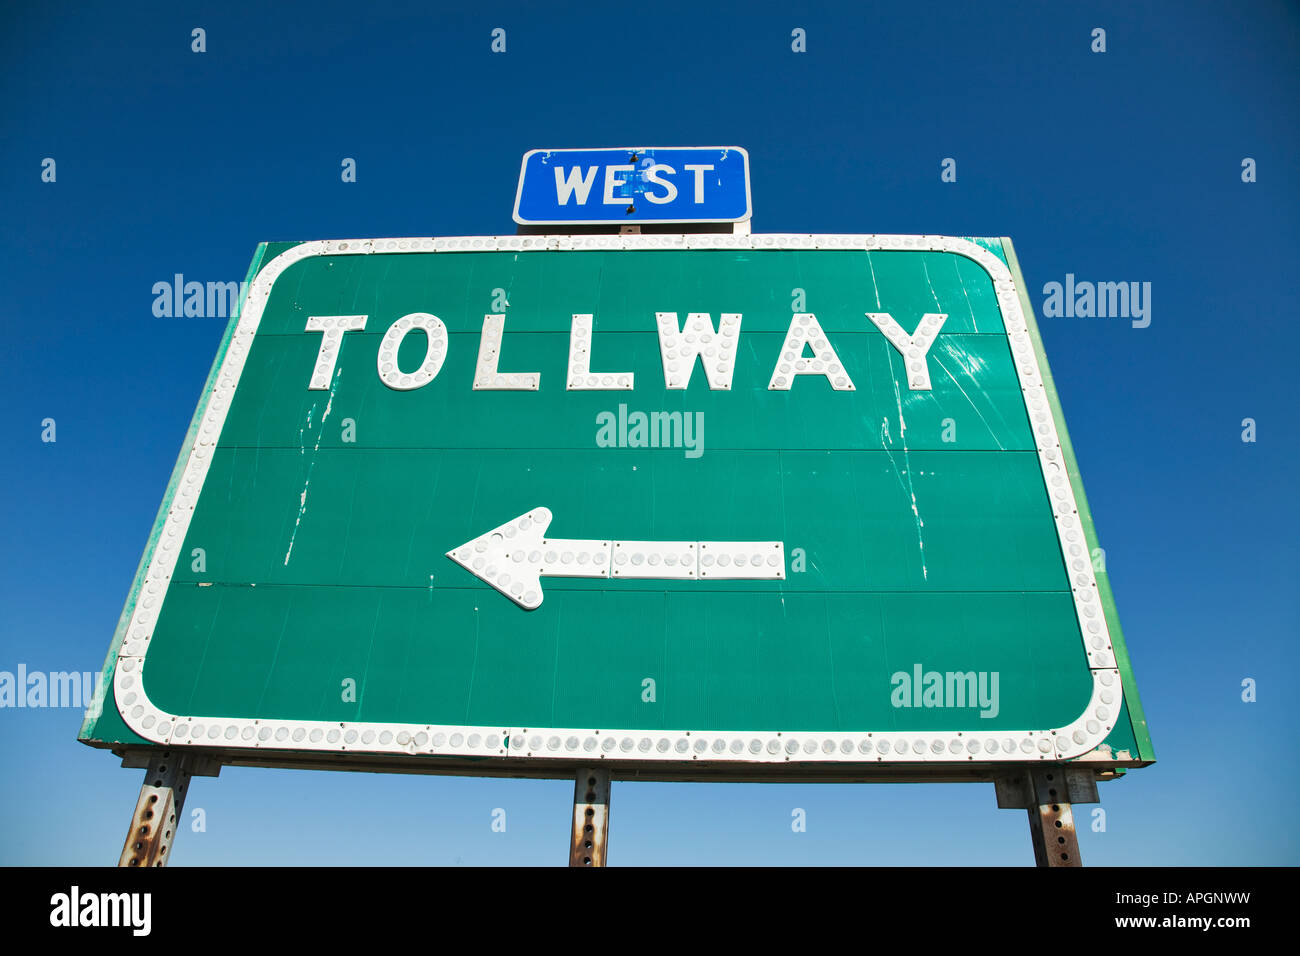 ILLINOIS DeKalb Green rectangular sign with arrow pointing to tollway west direction Stock Photo